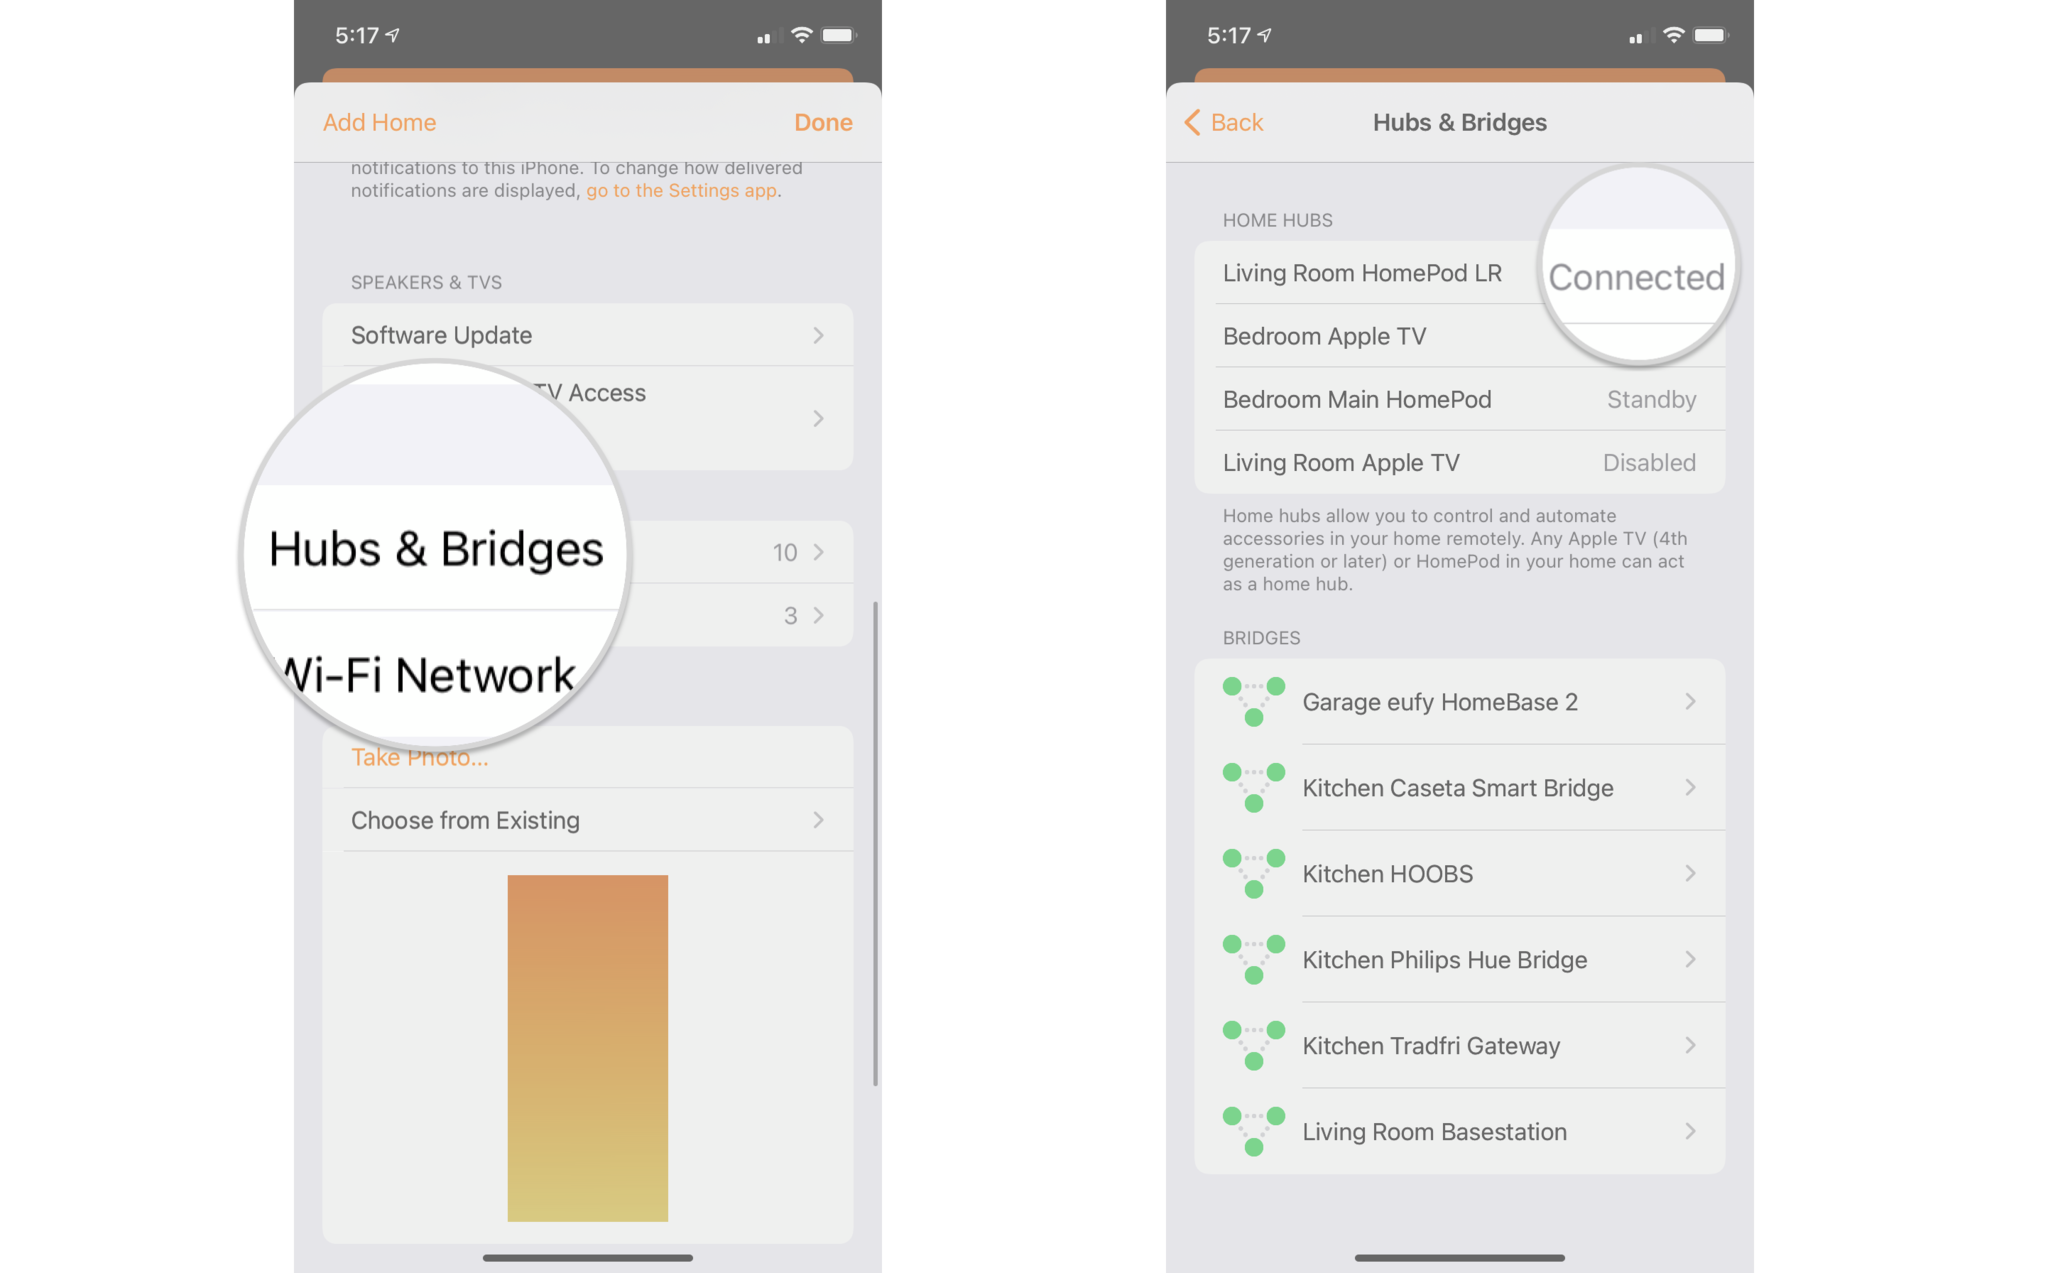 How to view the status of your current HomeKit Hub on the iPhone by showing the following steps: Scroll down and tap Hubs & Bridges, Review current status